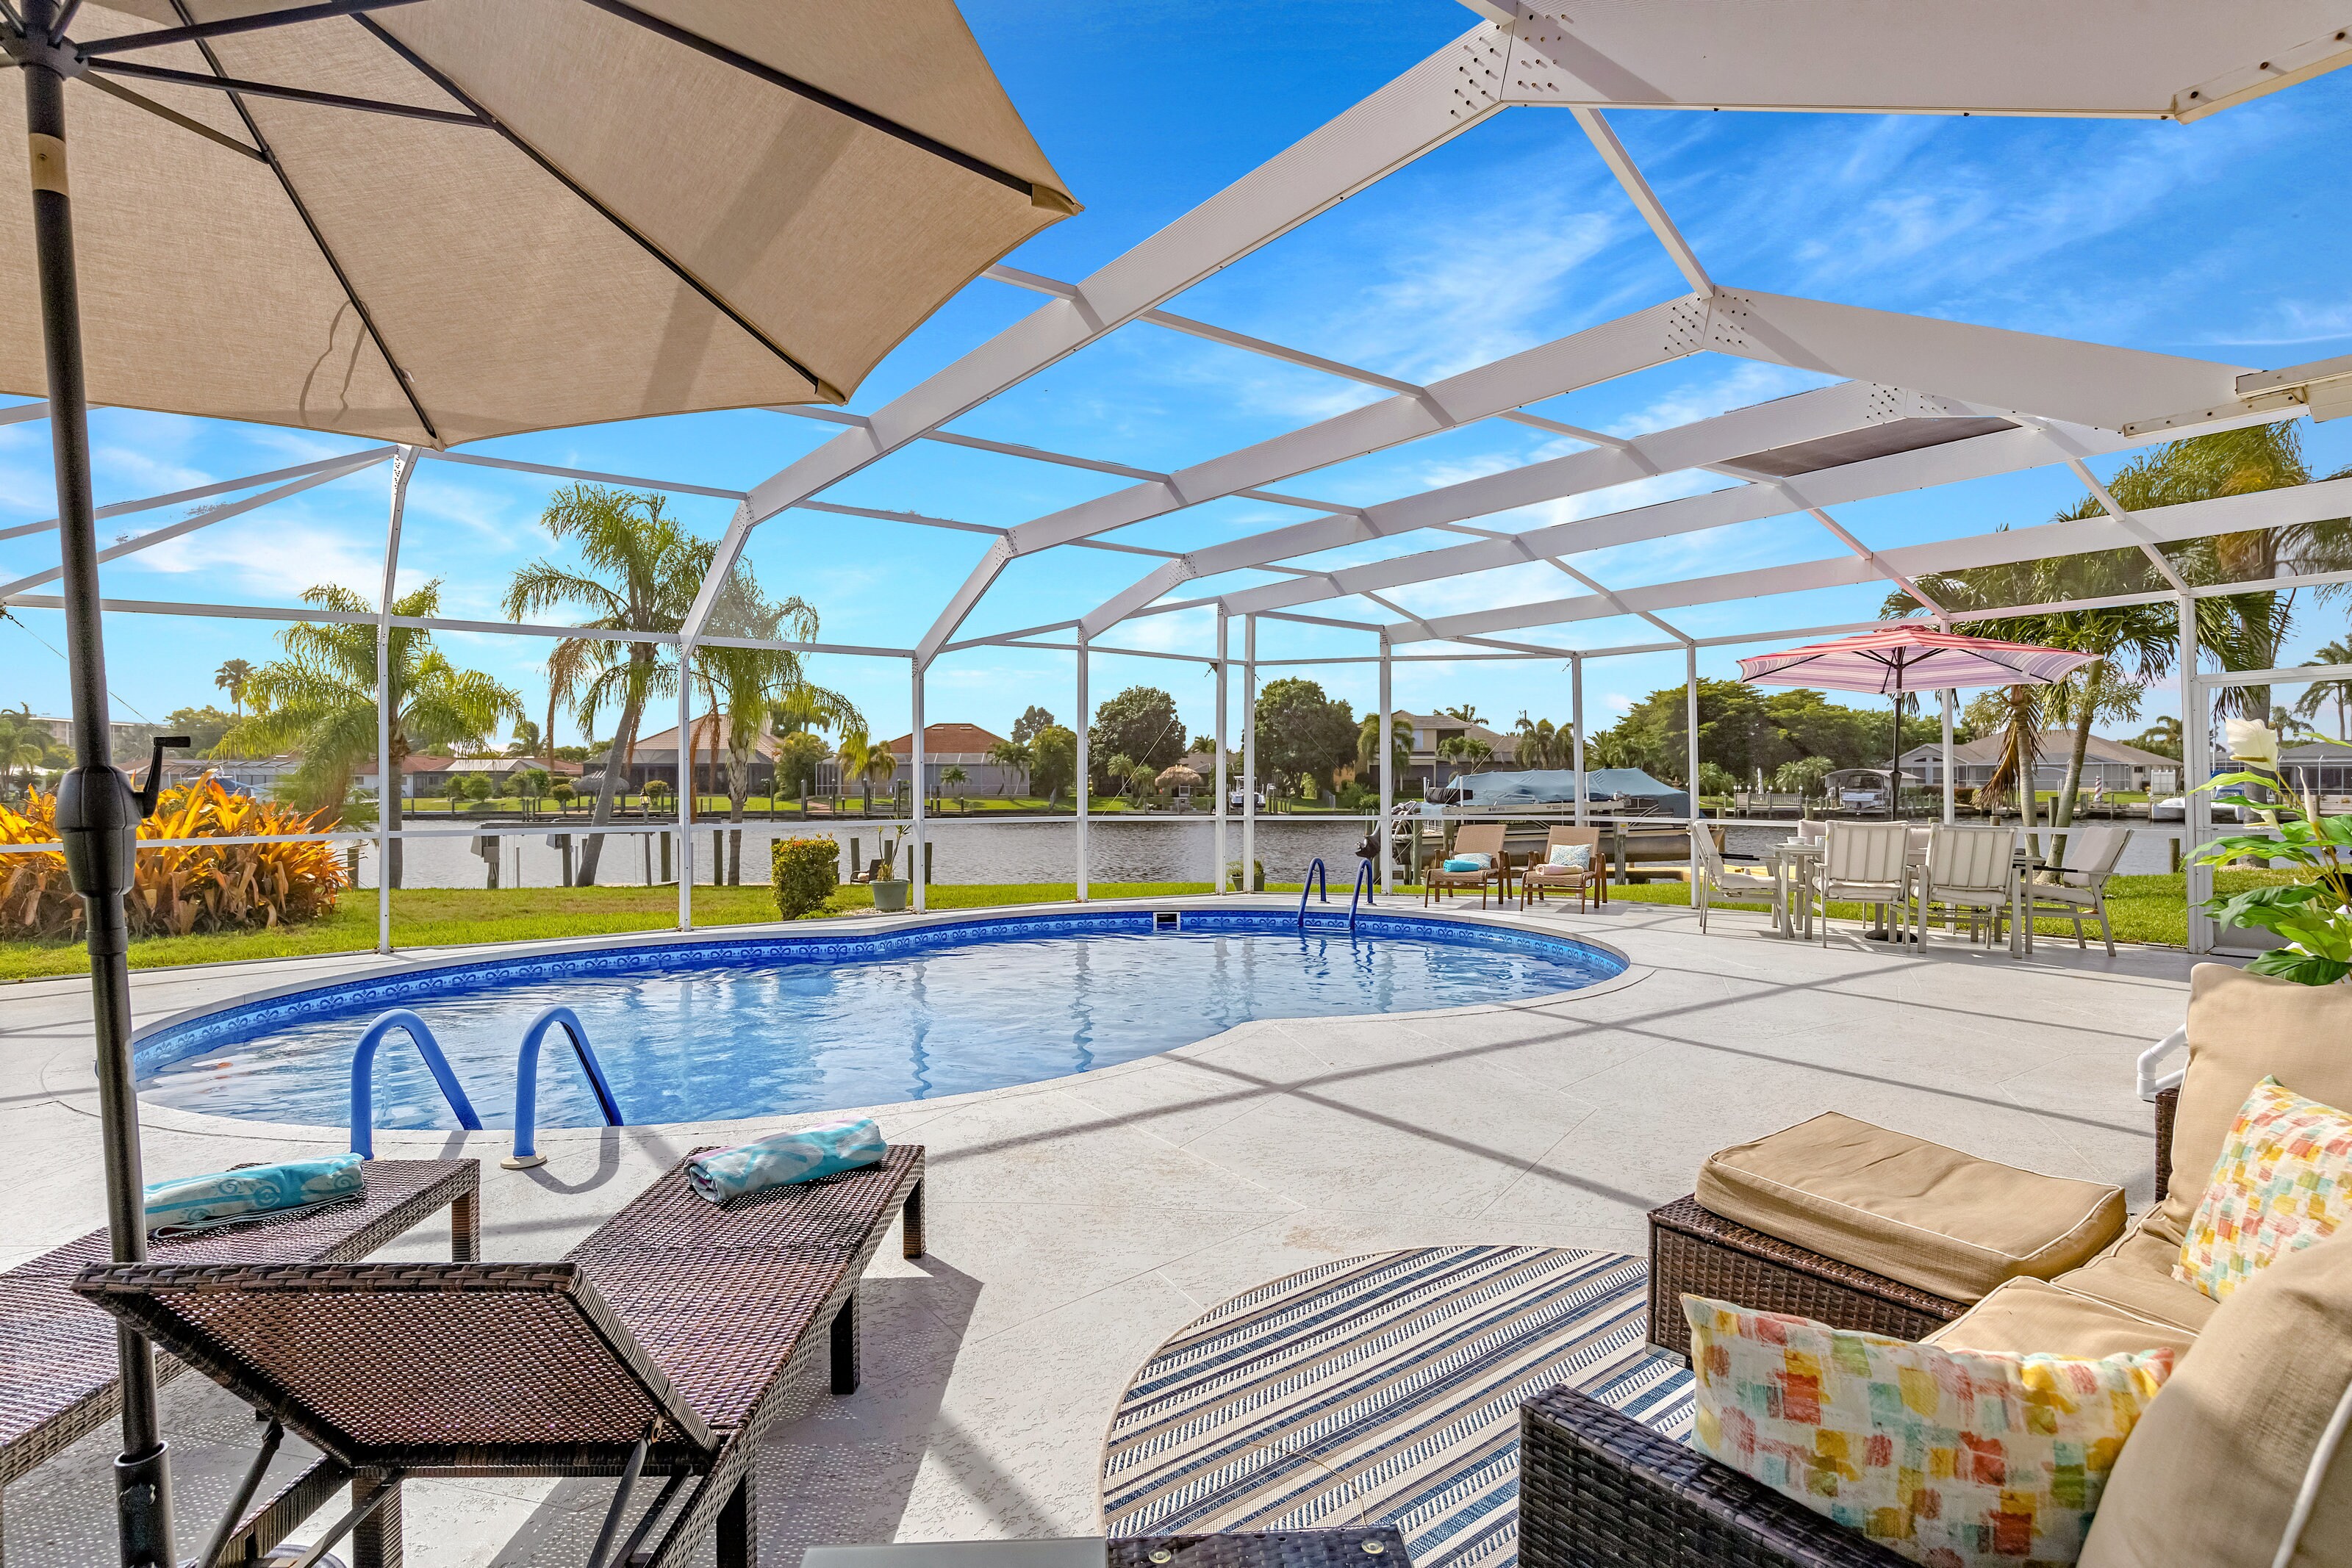 Property Image 1 - All About the Dolphins, Cape Coral